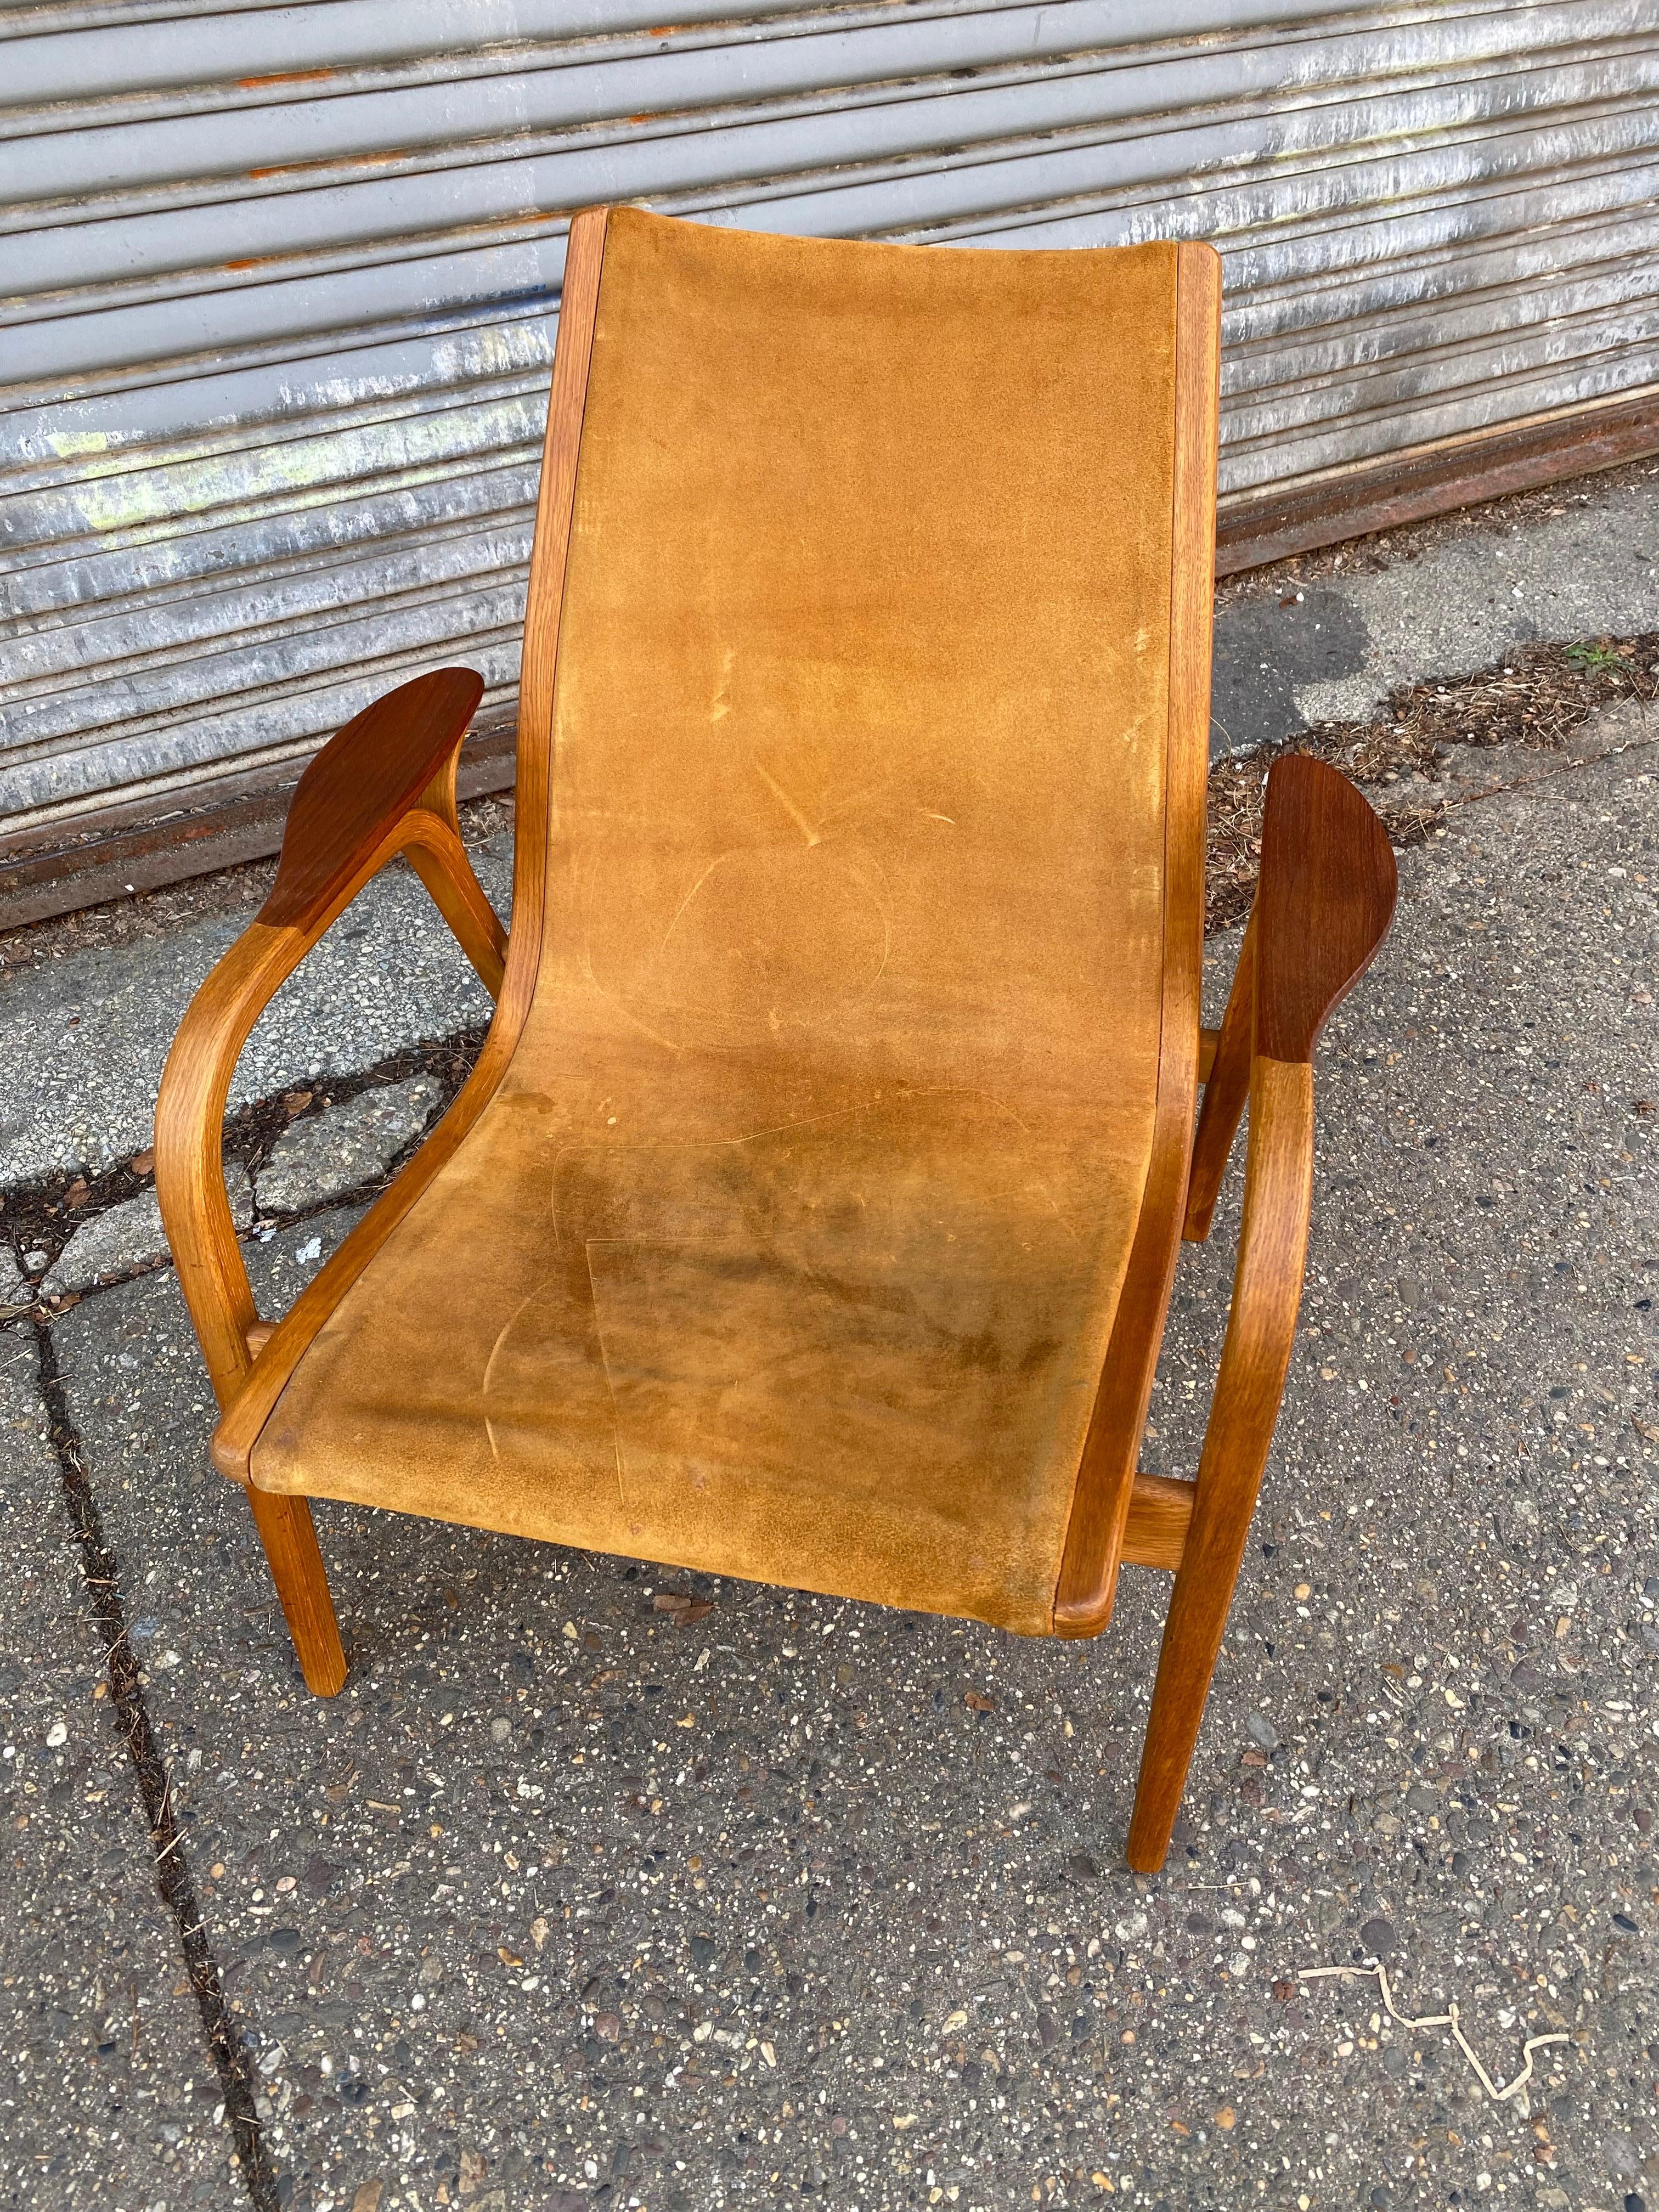 Low Back Yngve Ekstrom Lamino Chair in Tan Suede Leather.  Wood is Very Nice Condition!  This one saw a lot of use so leather sling is well worn with marks and wear.  Bent Oak Frame with Teak Armpads.  Several Lamino Chairs available!